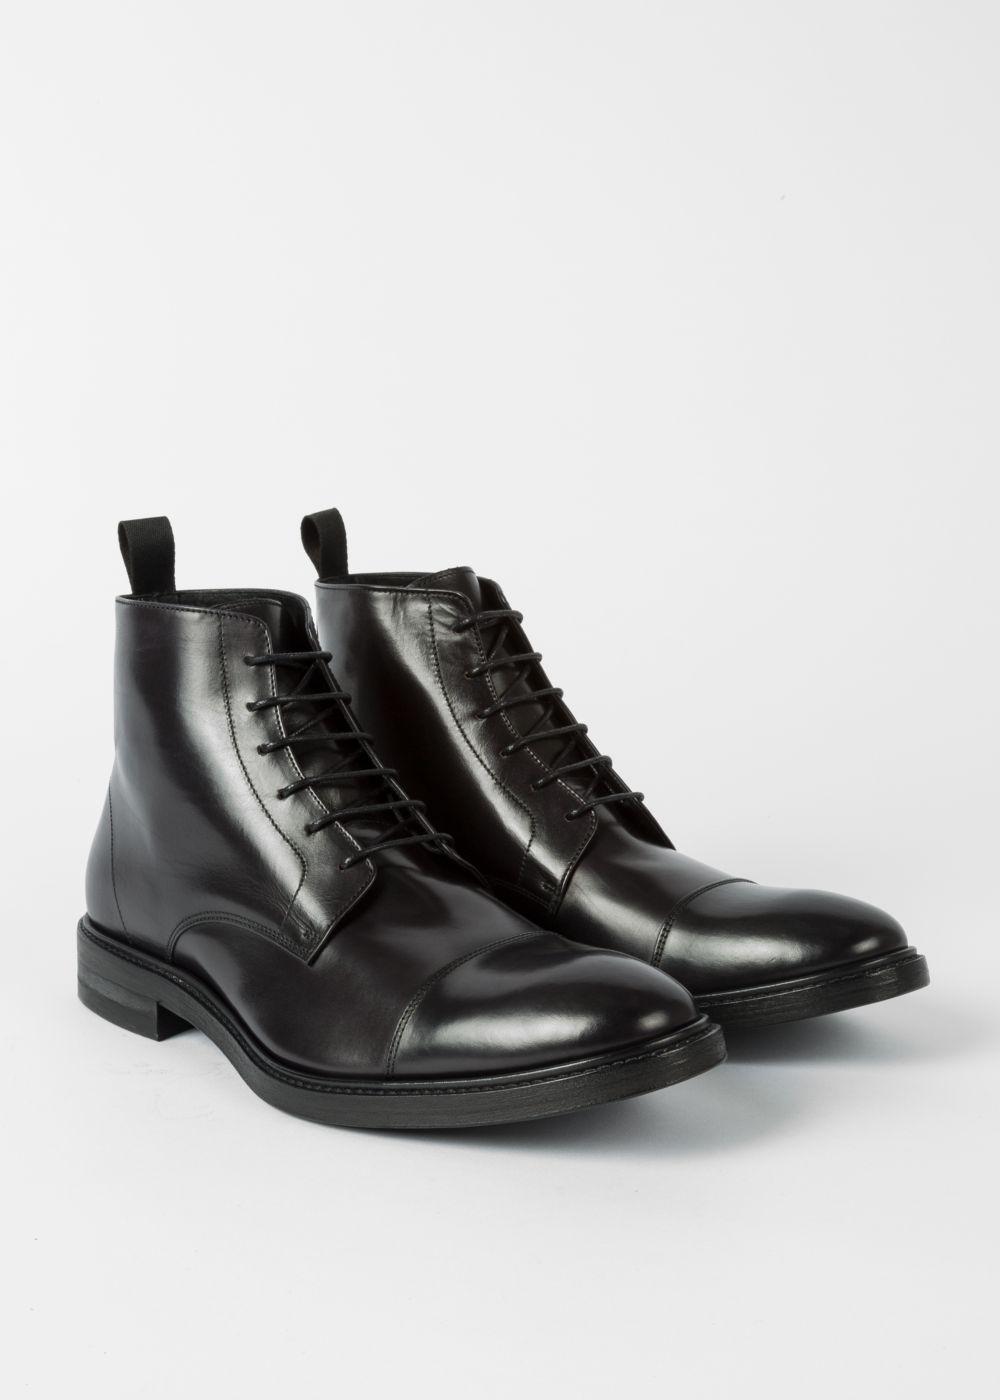 Paul Smith Black Leather 'Cesar' Boots for Men - Lyst